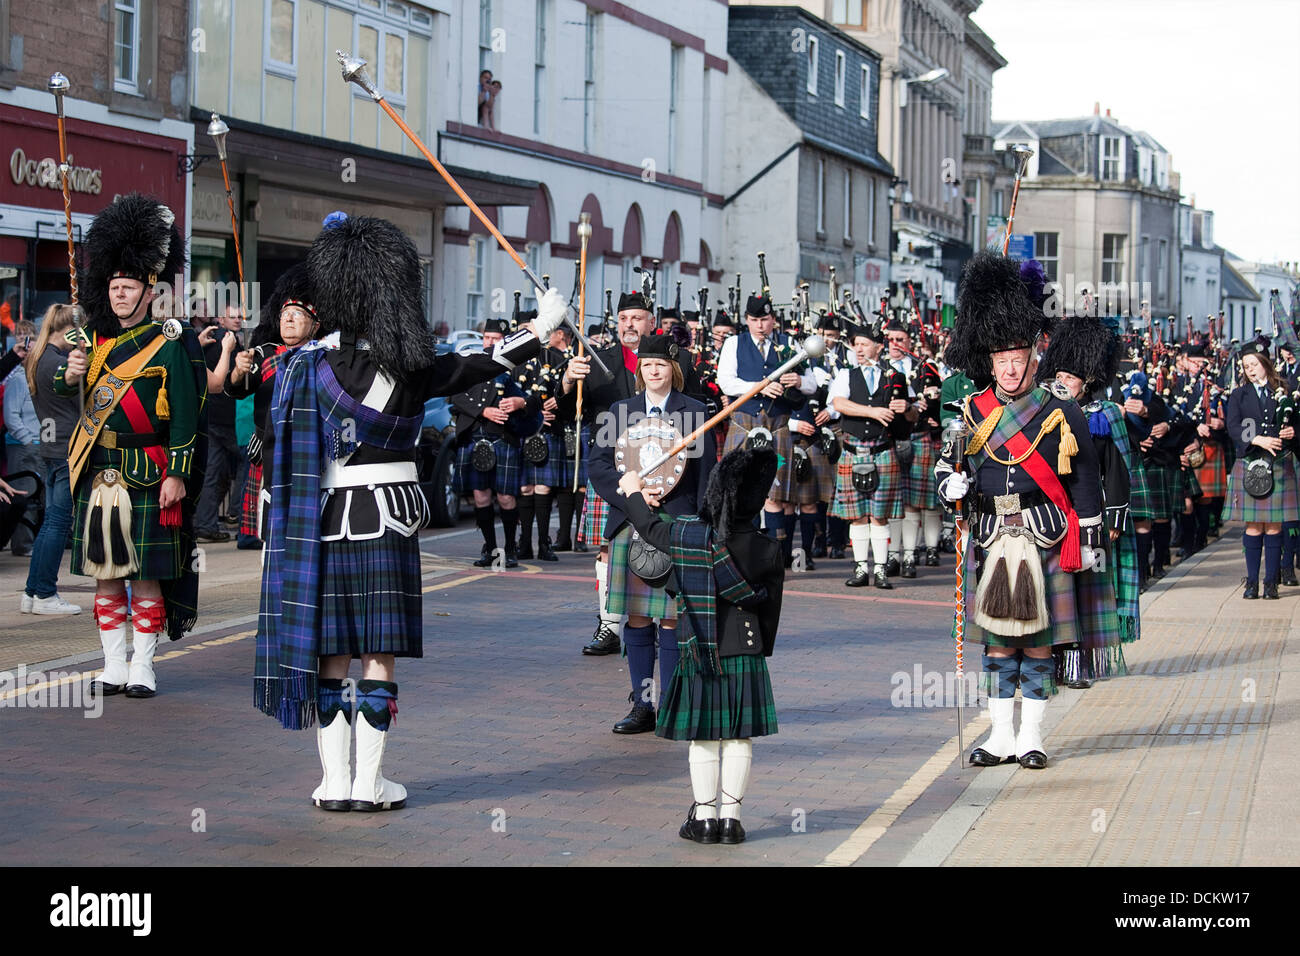 Nairn, Scotland - August 17th, 2013: Drum Majors leading their marching bands through the high street in Nairn. Stock Photo